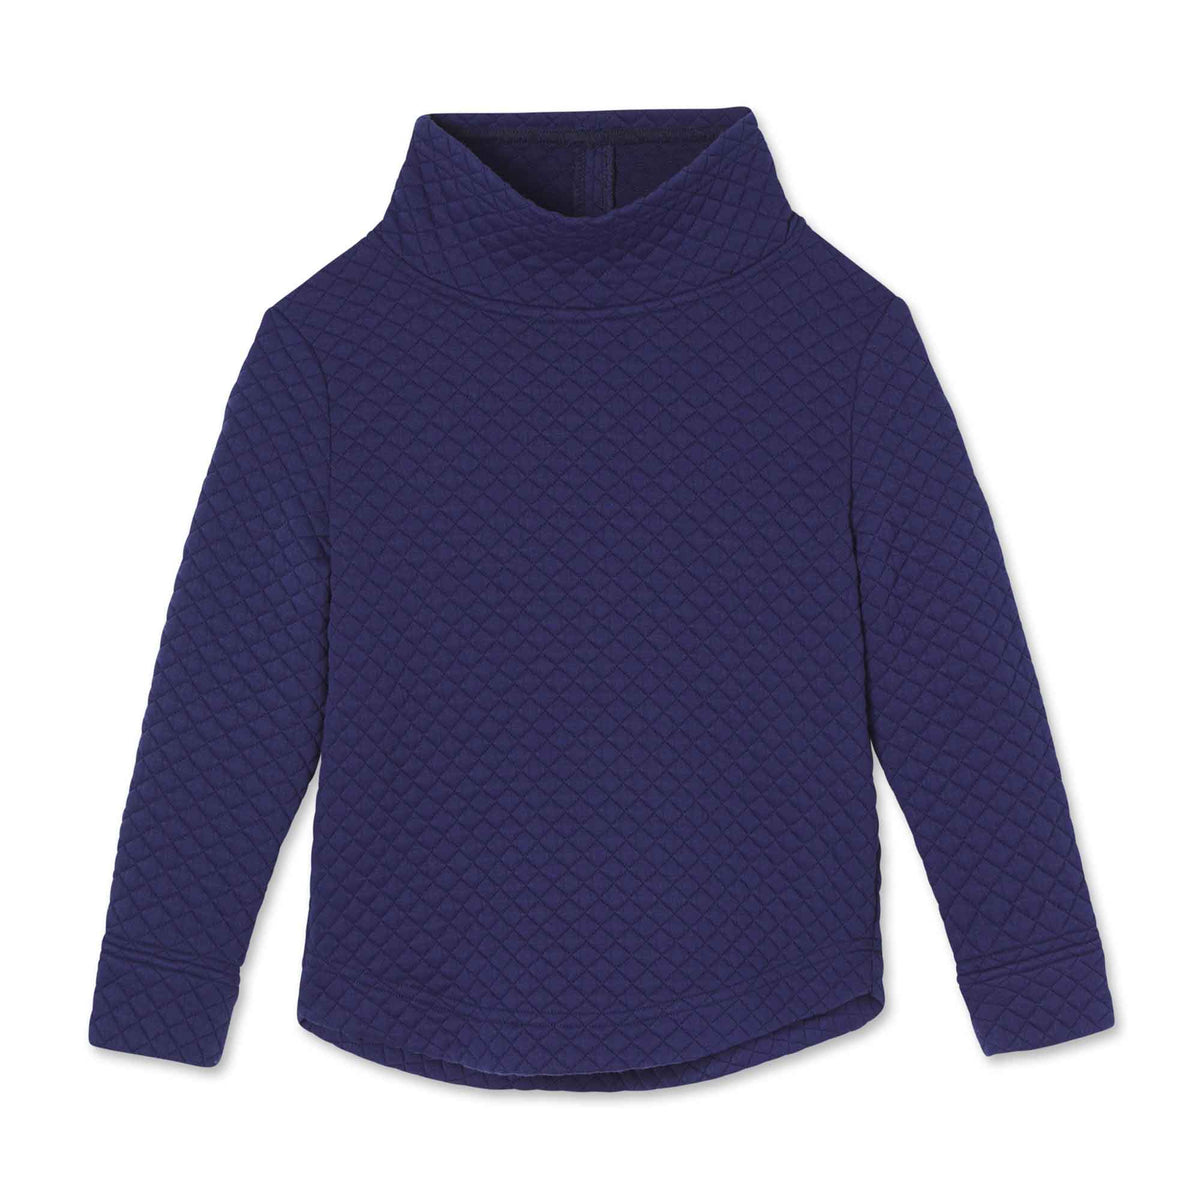 Classic and Preppy Wren Quilted Pullover, Blue Ribbon-Shirts and Tops-Blue Ribbon-XS (2-3T)-CPC - Classic Prep Childrenswear